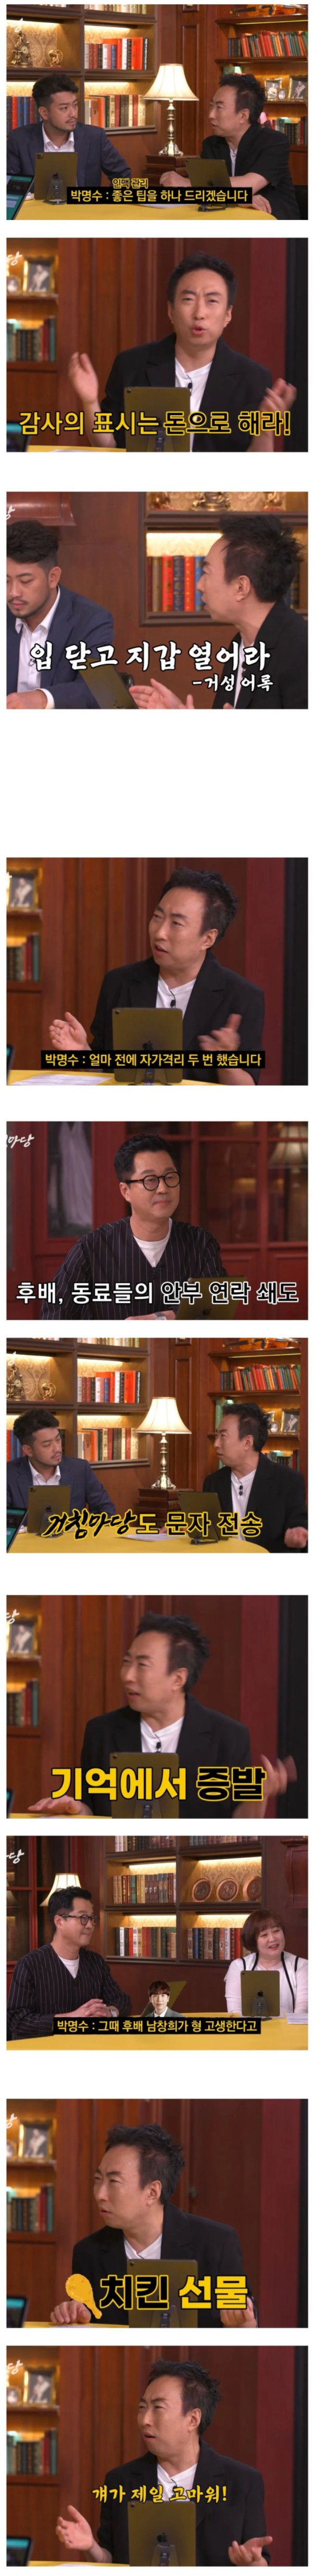 Park Myungsoo's tips on managing personal connections...jpg